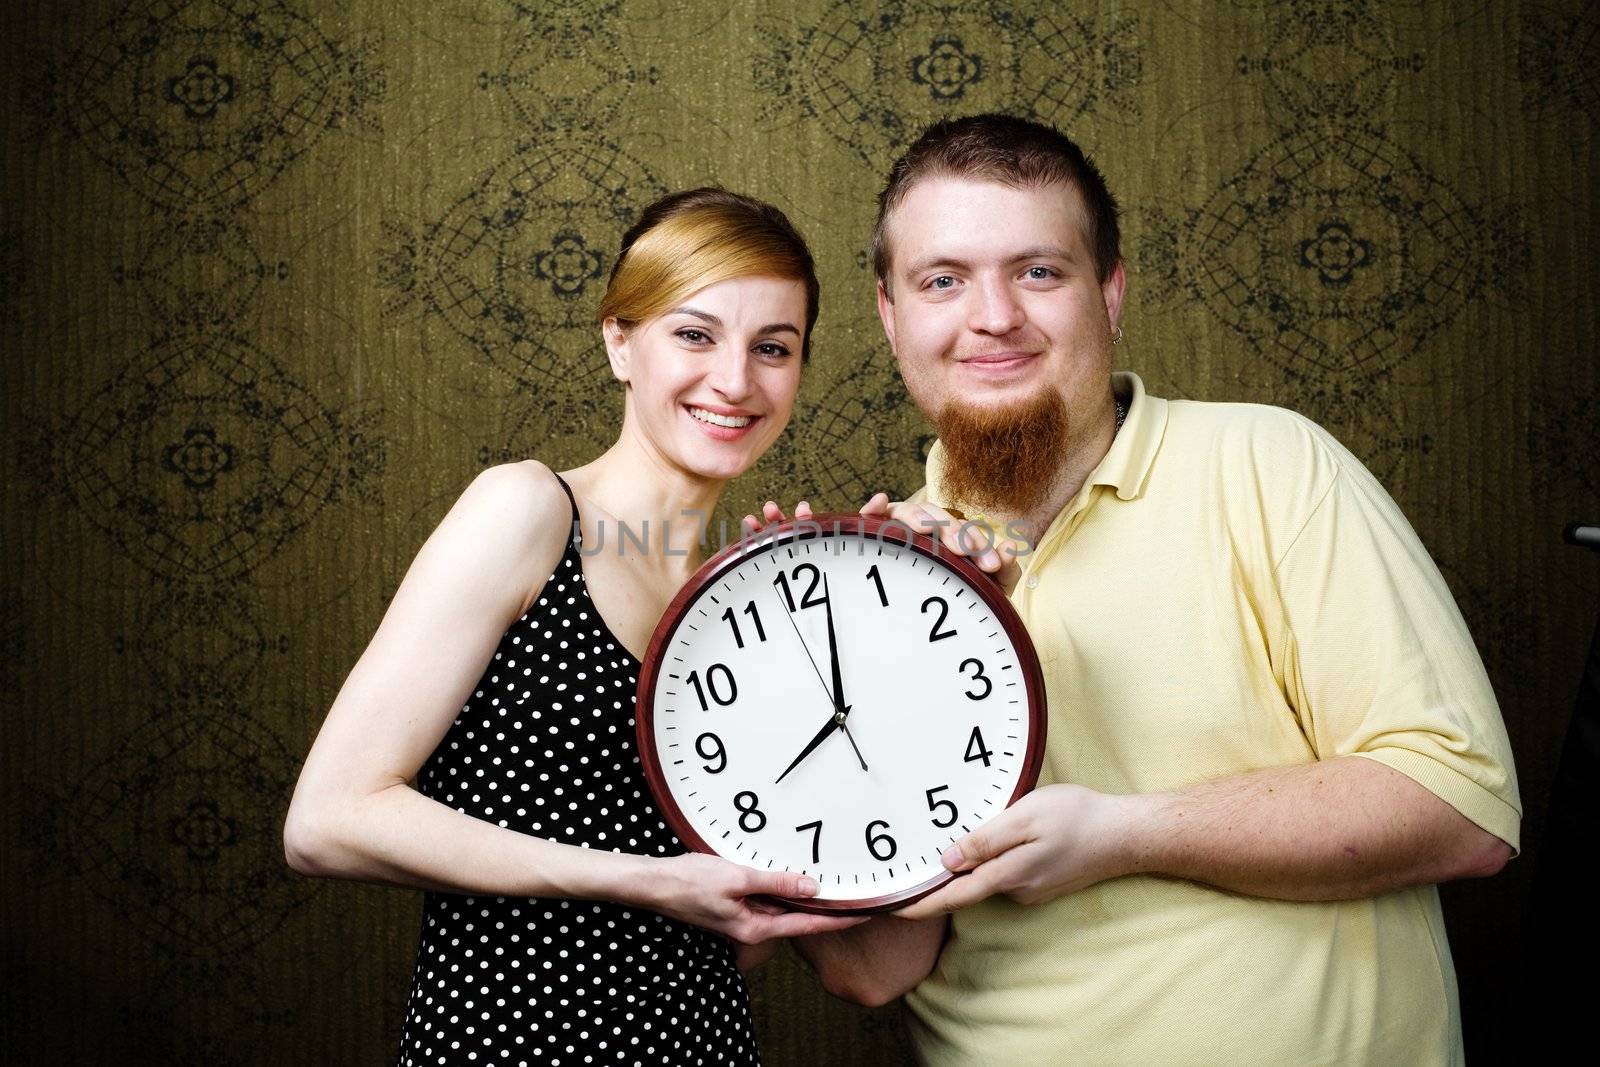 An image of a man and a woman with a clock